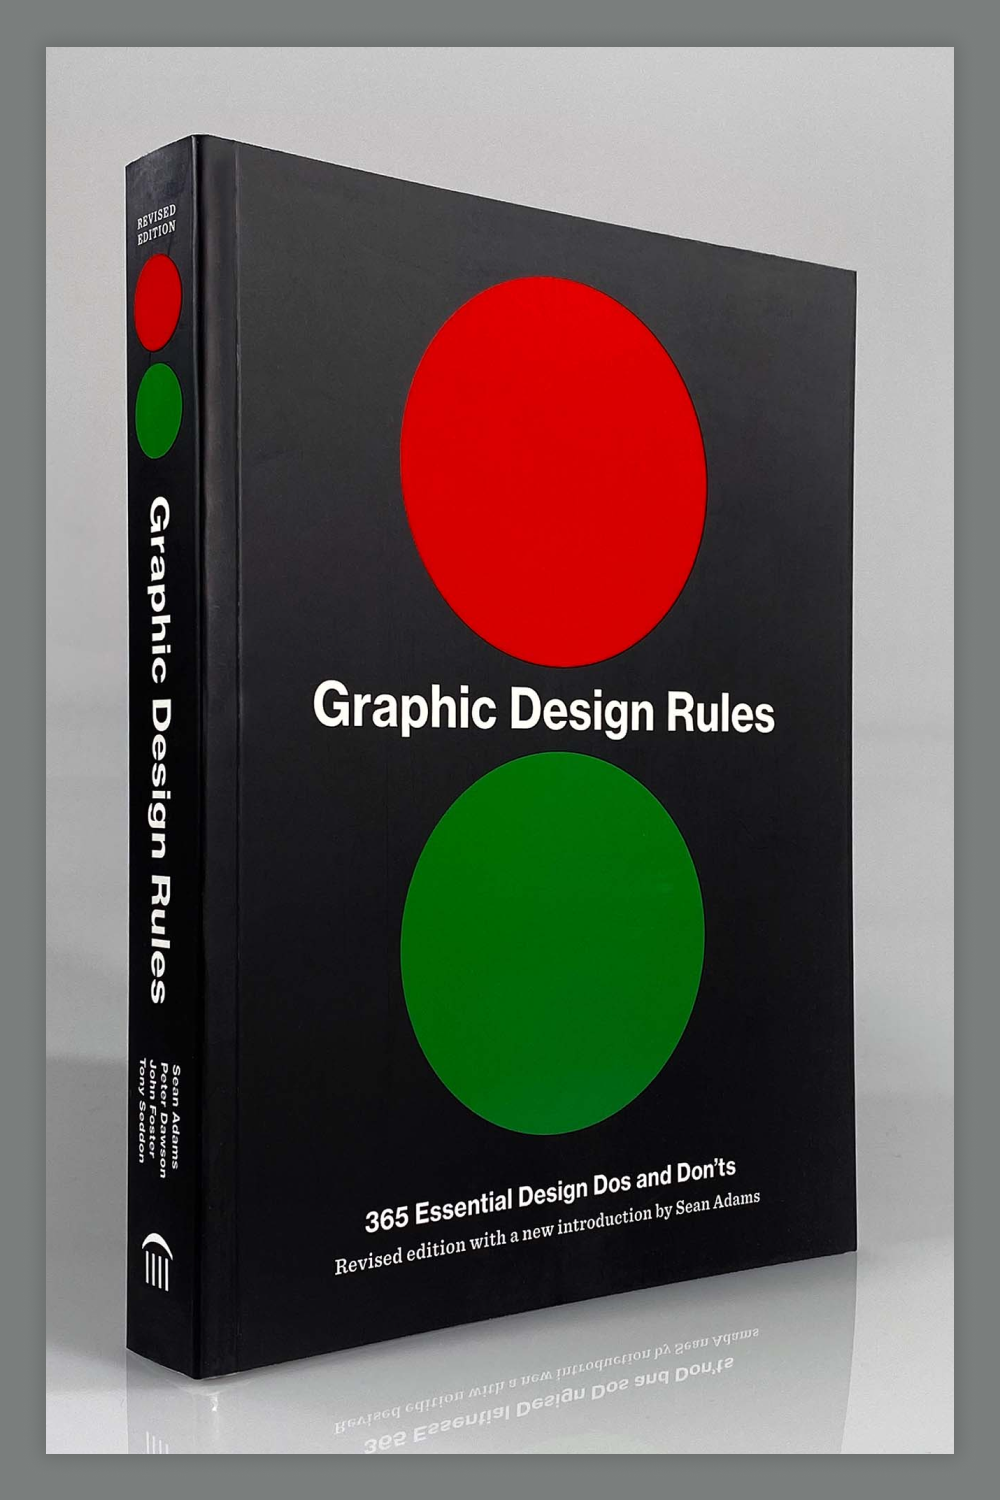 The book Graphic Design Rules.